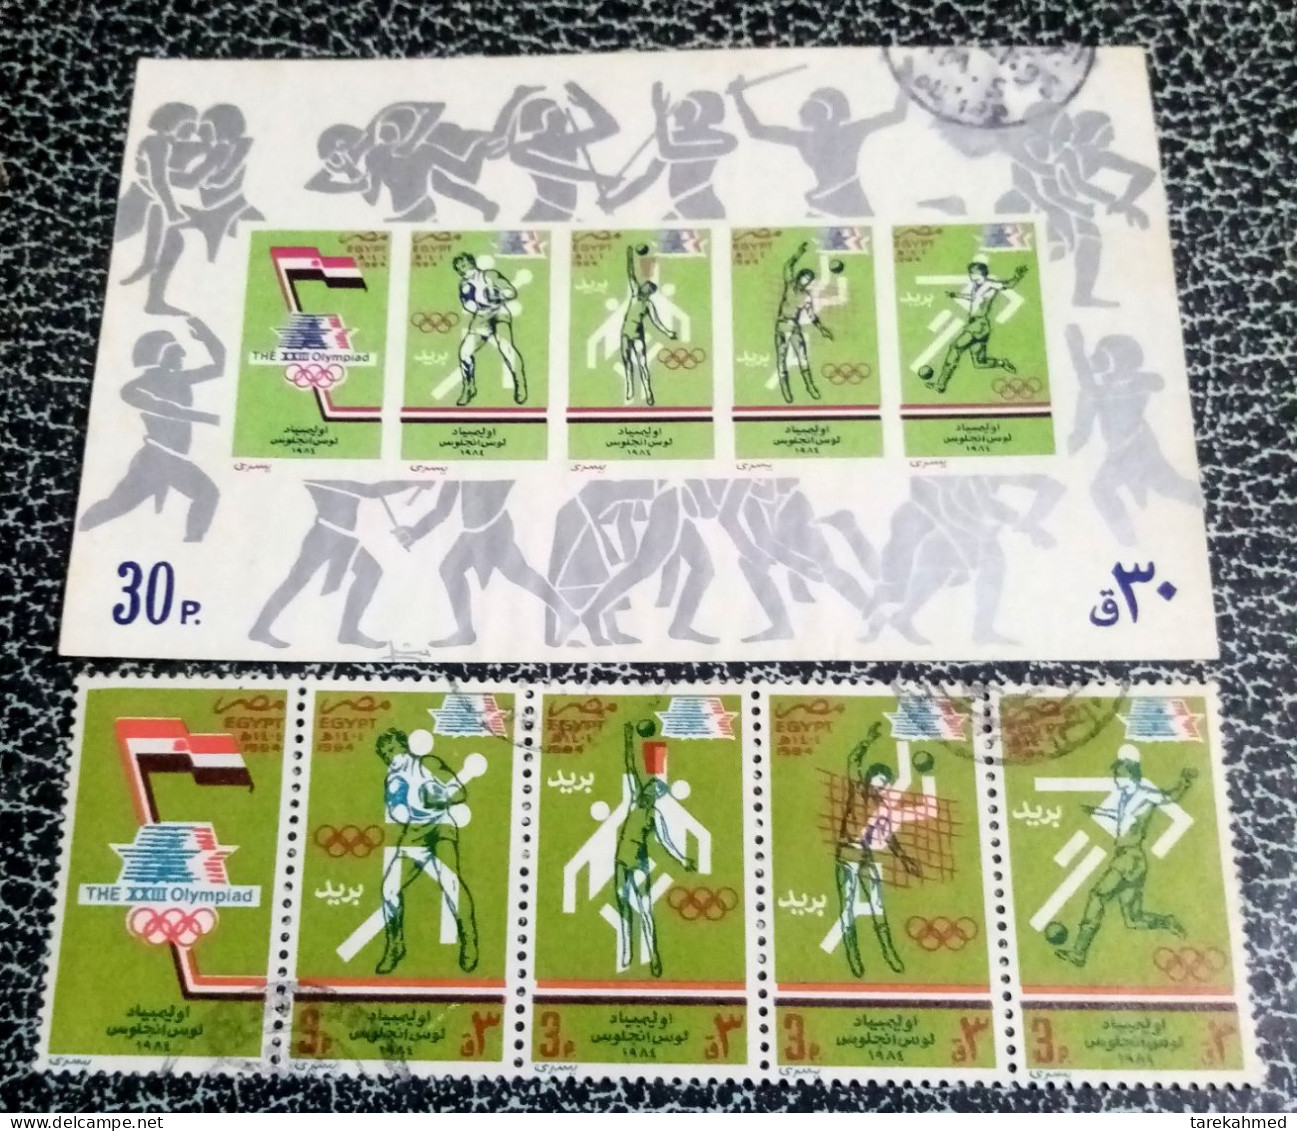 EGYPT -Complete Set Of The Olympic Games 1984-Los Angeles Olympics With The Souvenir Sheet, VF - Oblitérés